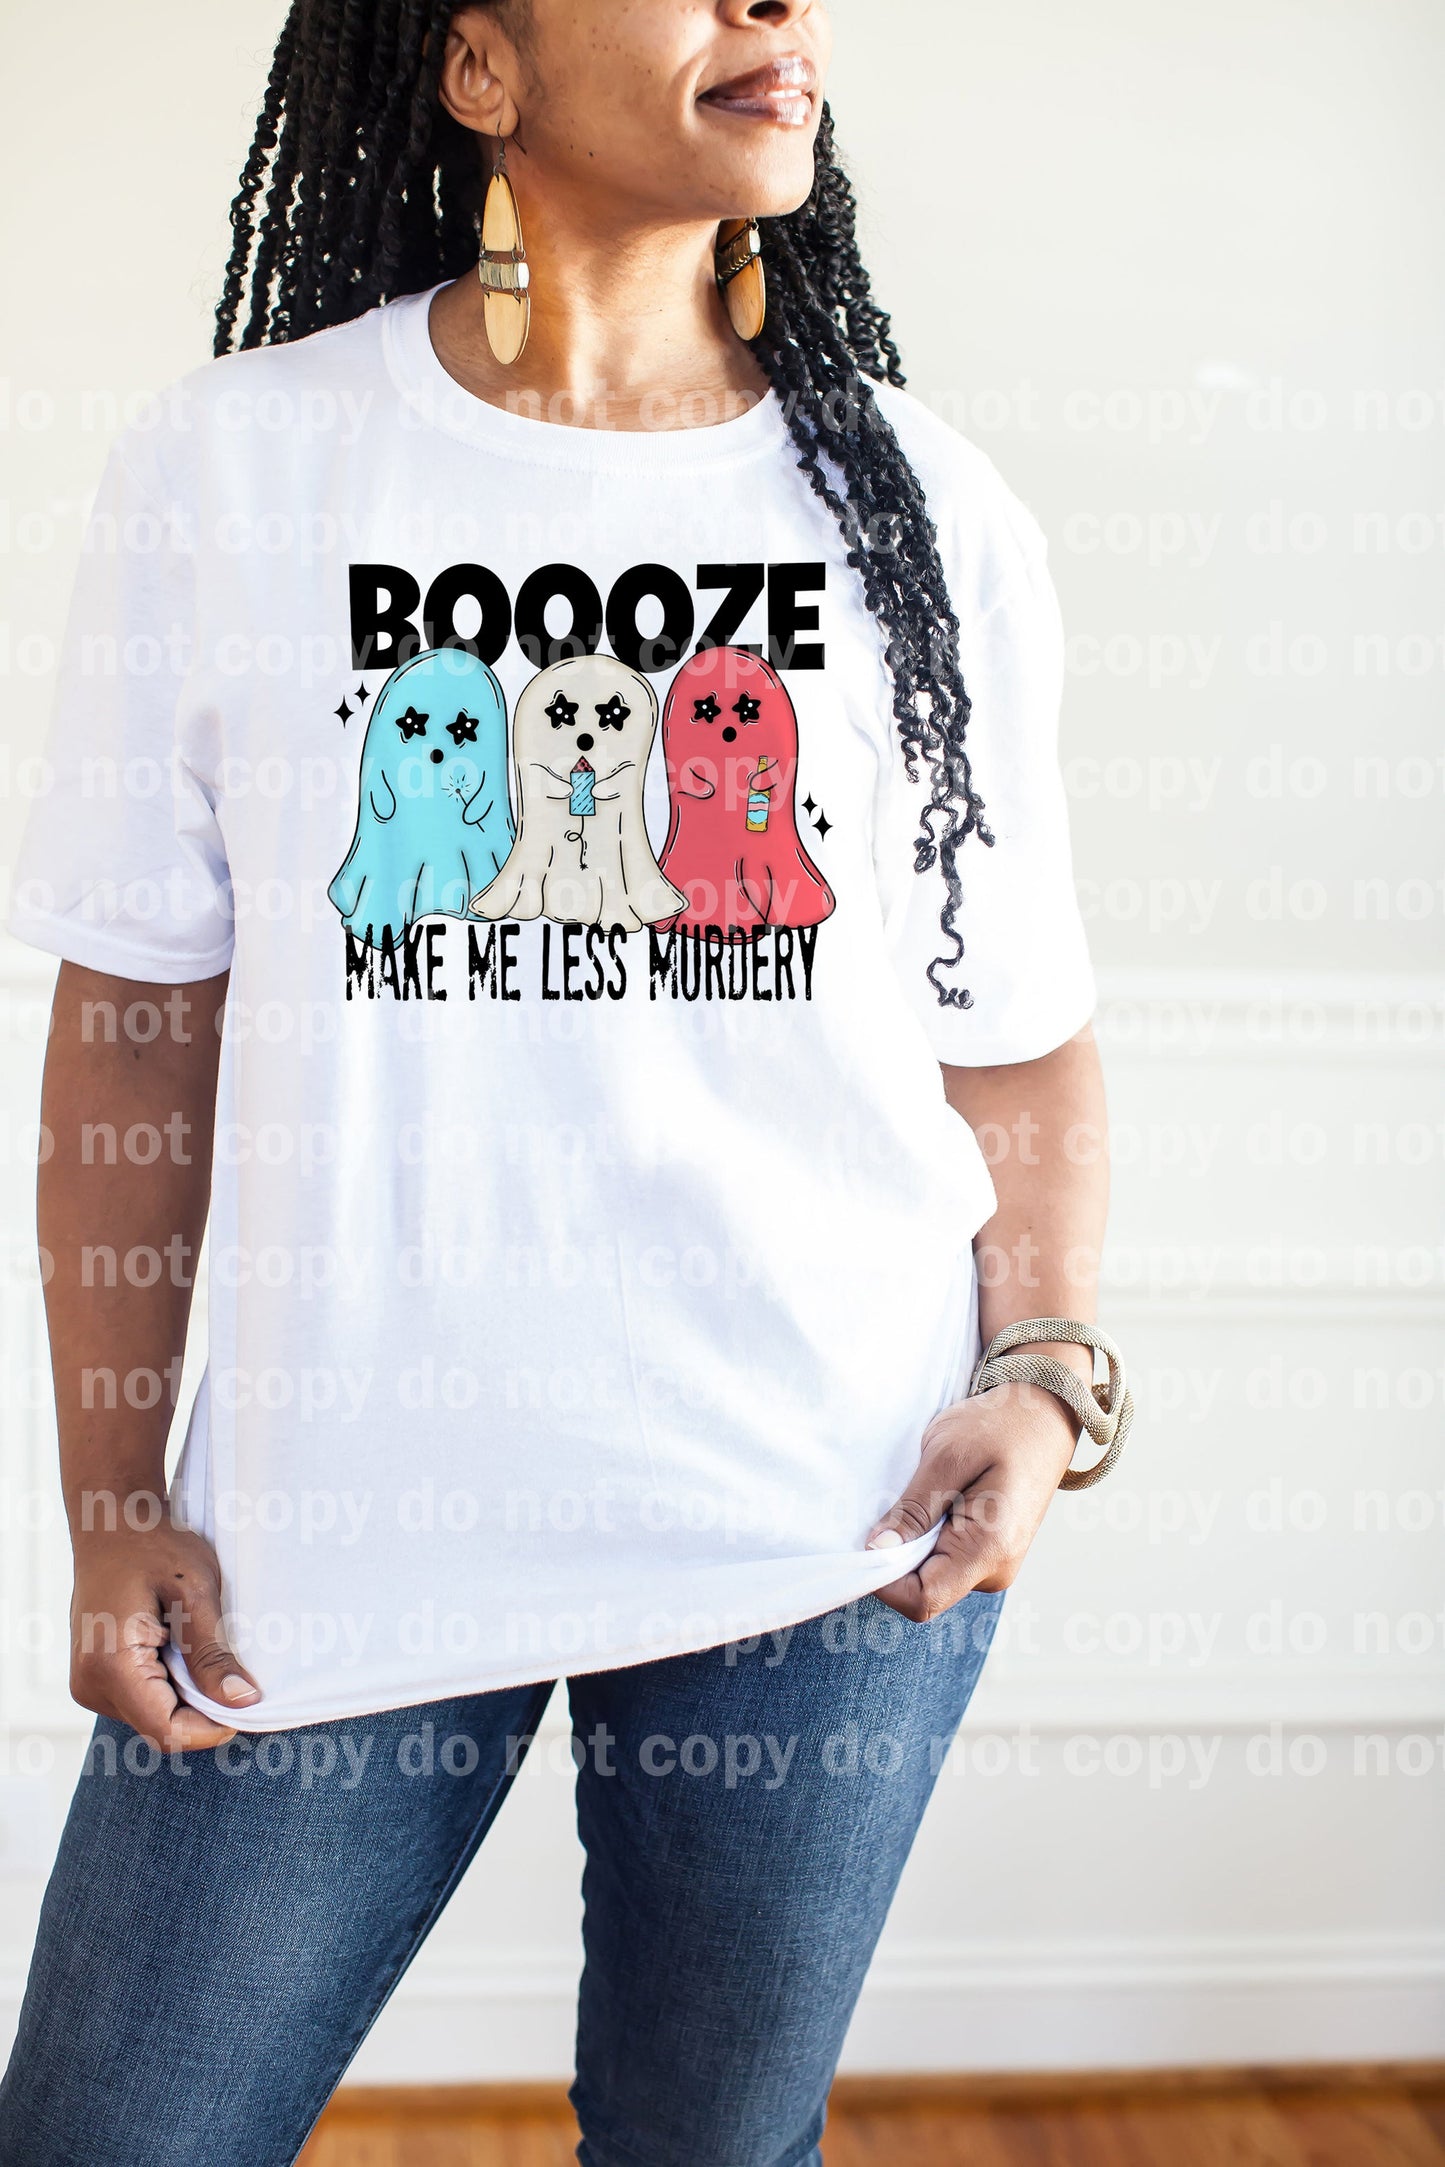 Boooze Make Me Less Murdery Dream Print or Sublimation Print